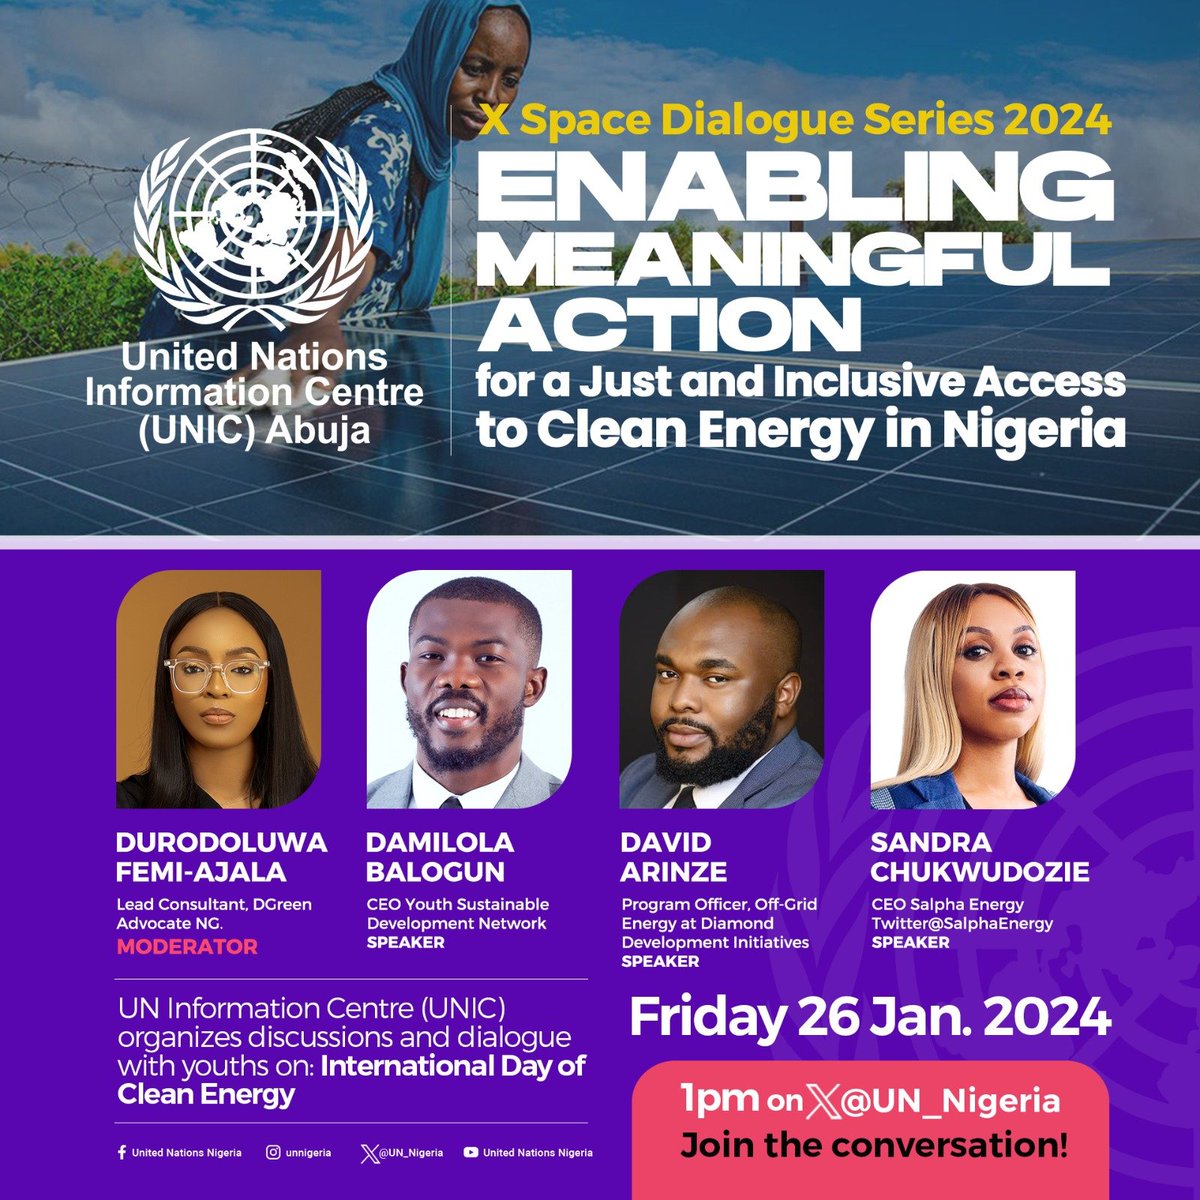 January 26 is International Day of #CleanEnergy , join @SalphaEnergy,@TheDammyBalogun , @david_energyNG and @duro_fa as they speak on 'Enabling Meaningful Action for a Just and Inclusive Access to Clean Energy in Nigeria' Join the conversation @UN_Nigeria #CleanEnergy